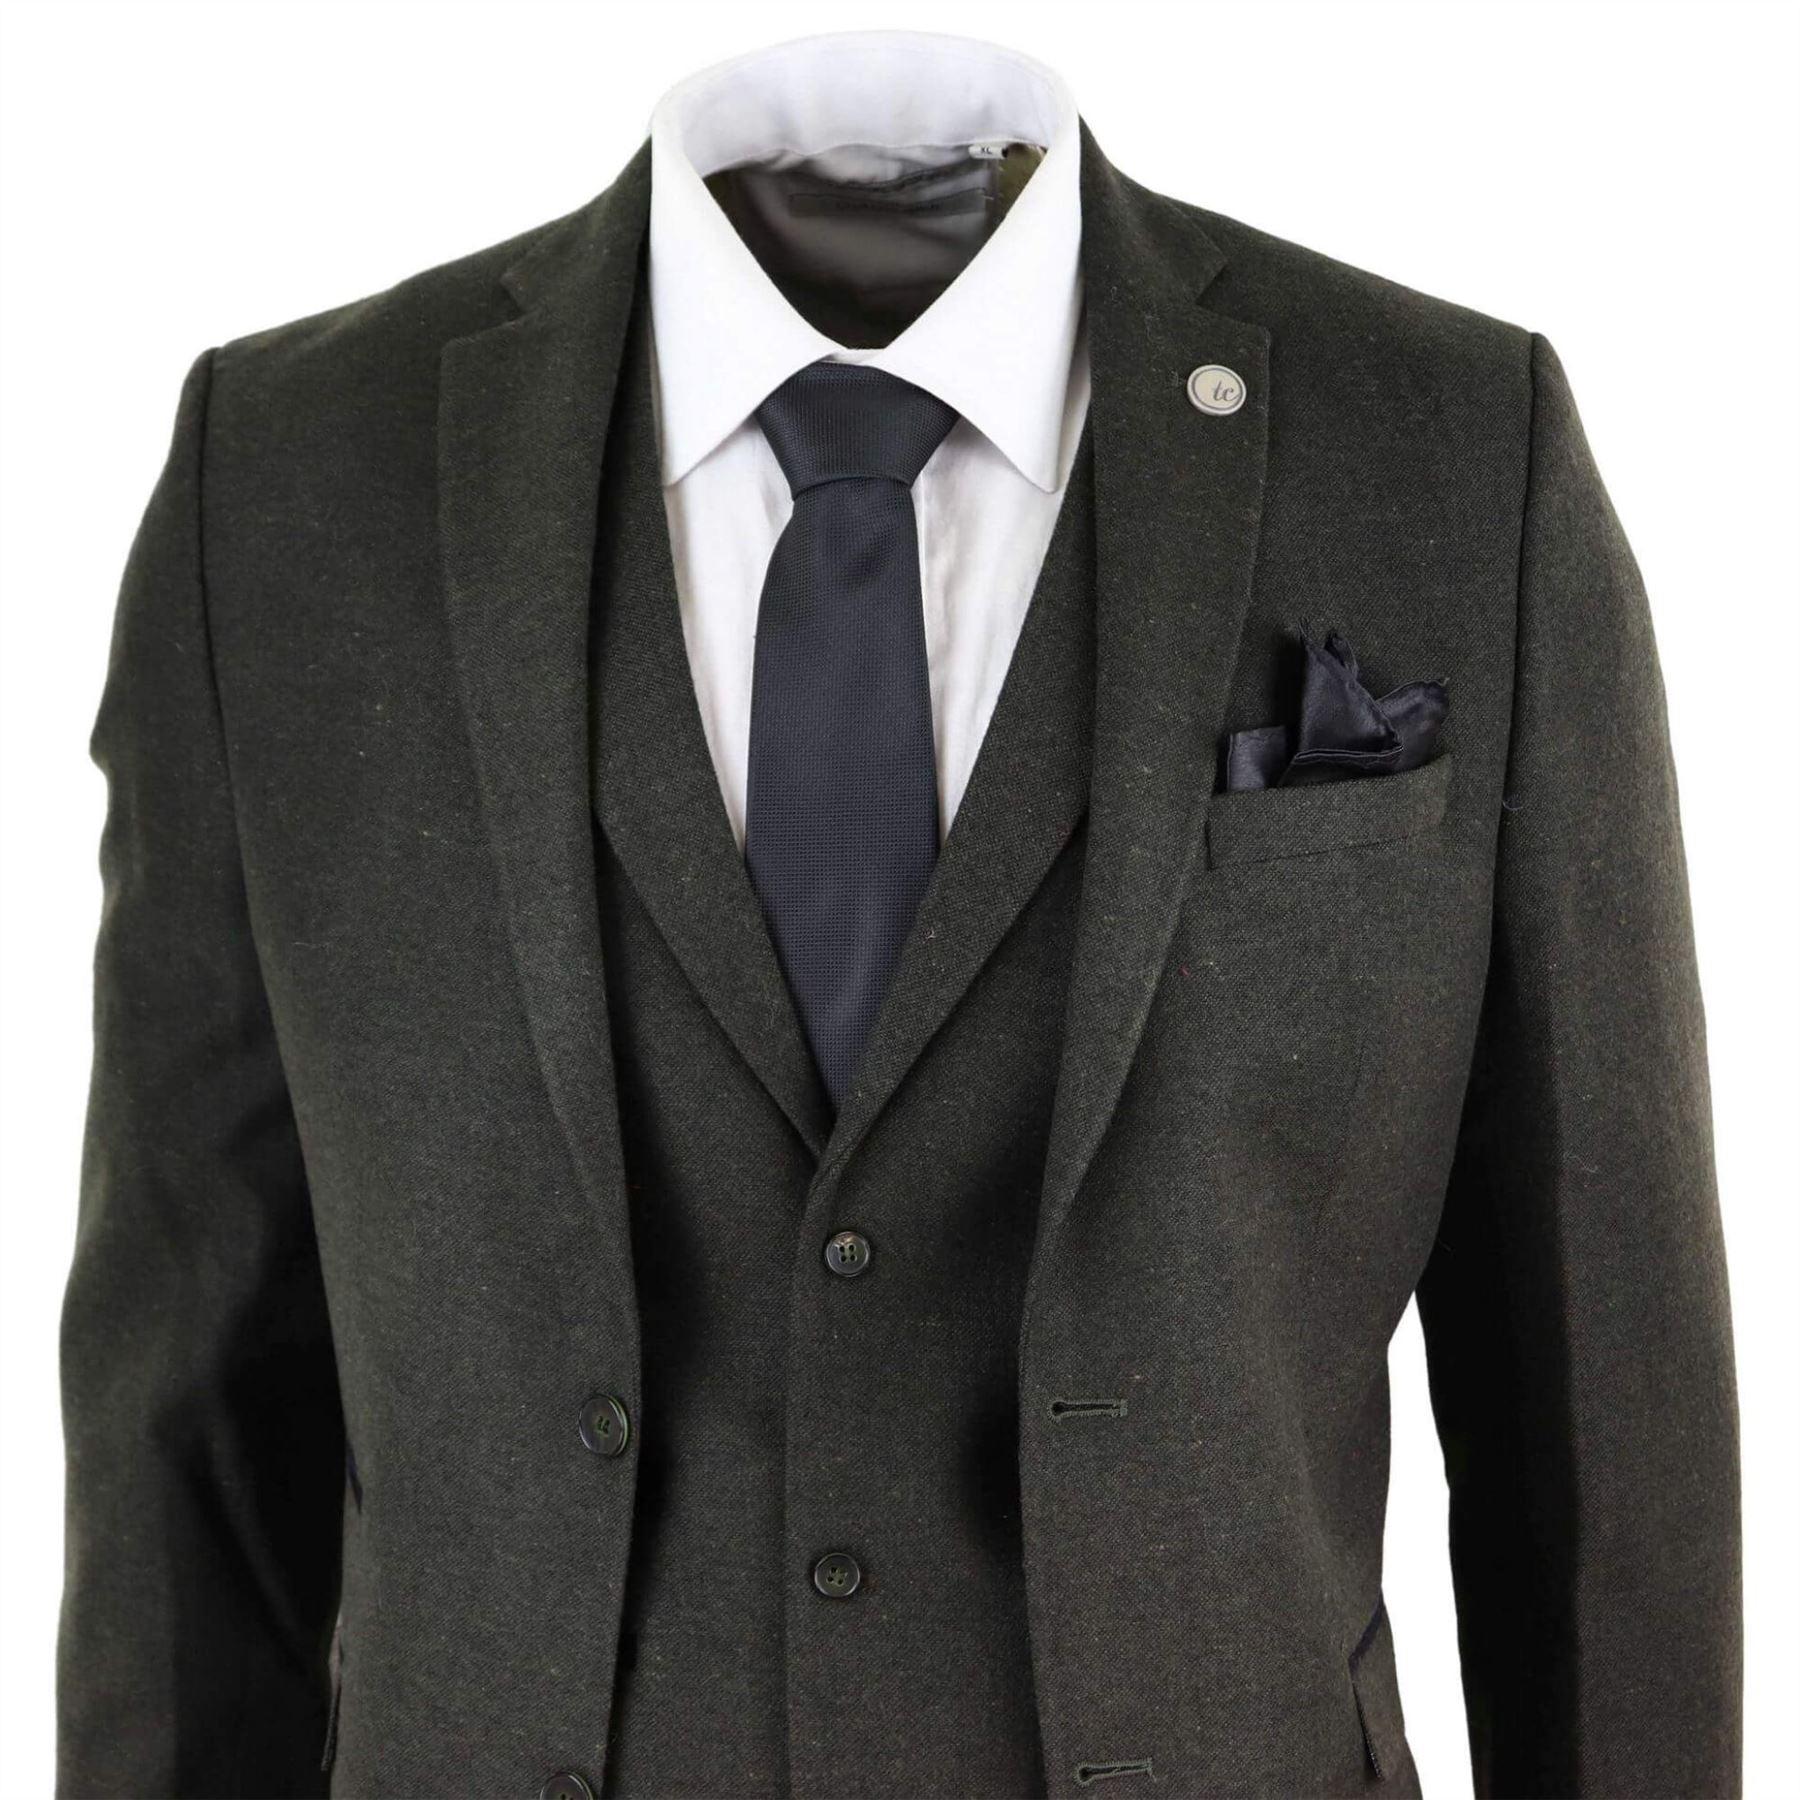 Mens Wool 3 Piece Suit Tweed Olive Green Black Tailored Fit Classic - Knighthood Store